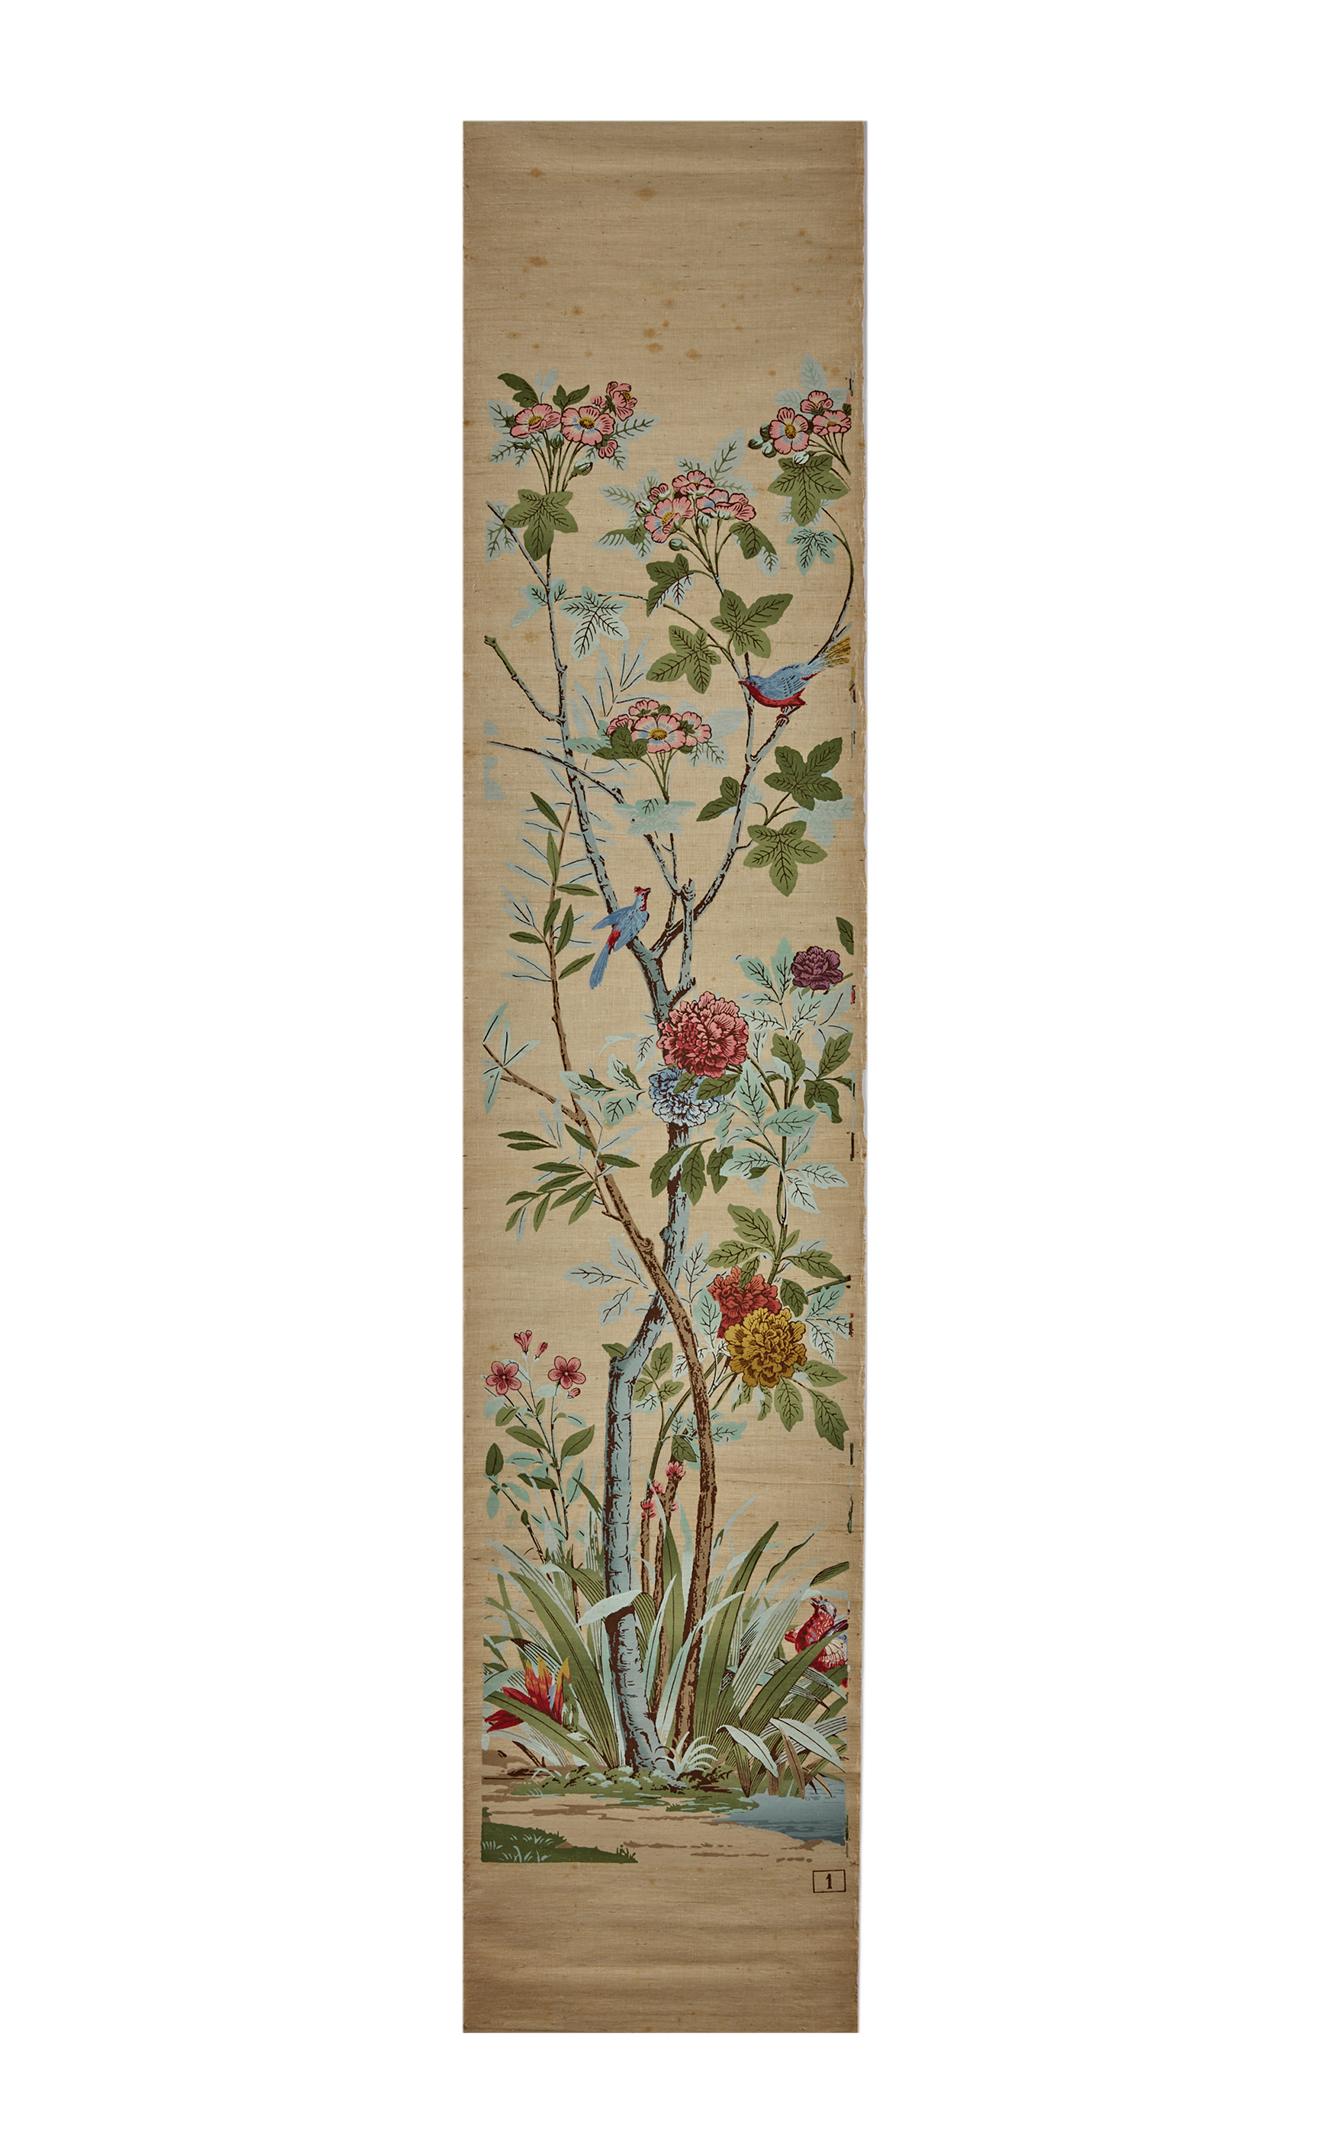 Zuber, 'Decor Chinois' Hand Wood Blocked on Grasscloth Scenic Wallpaper For Sale 5